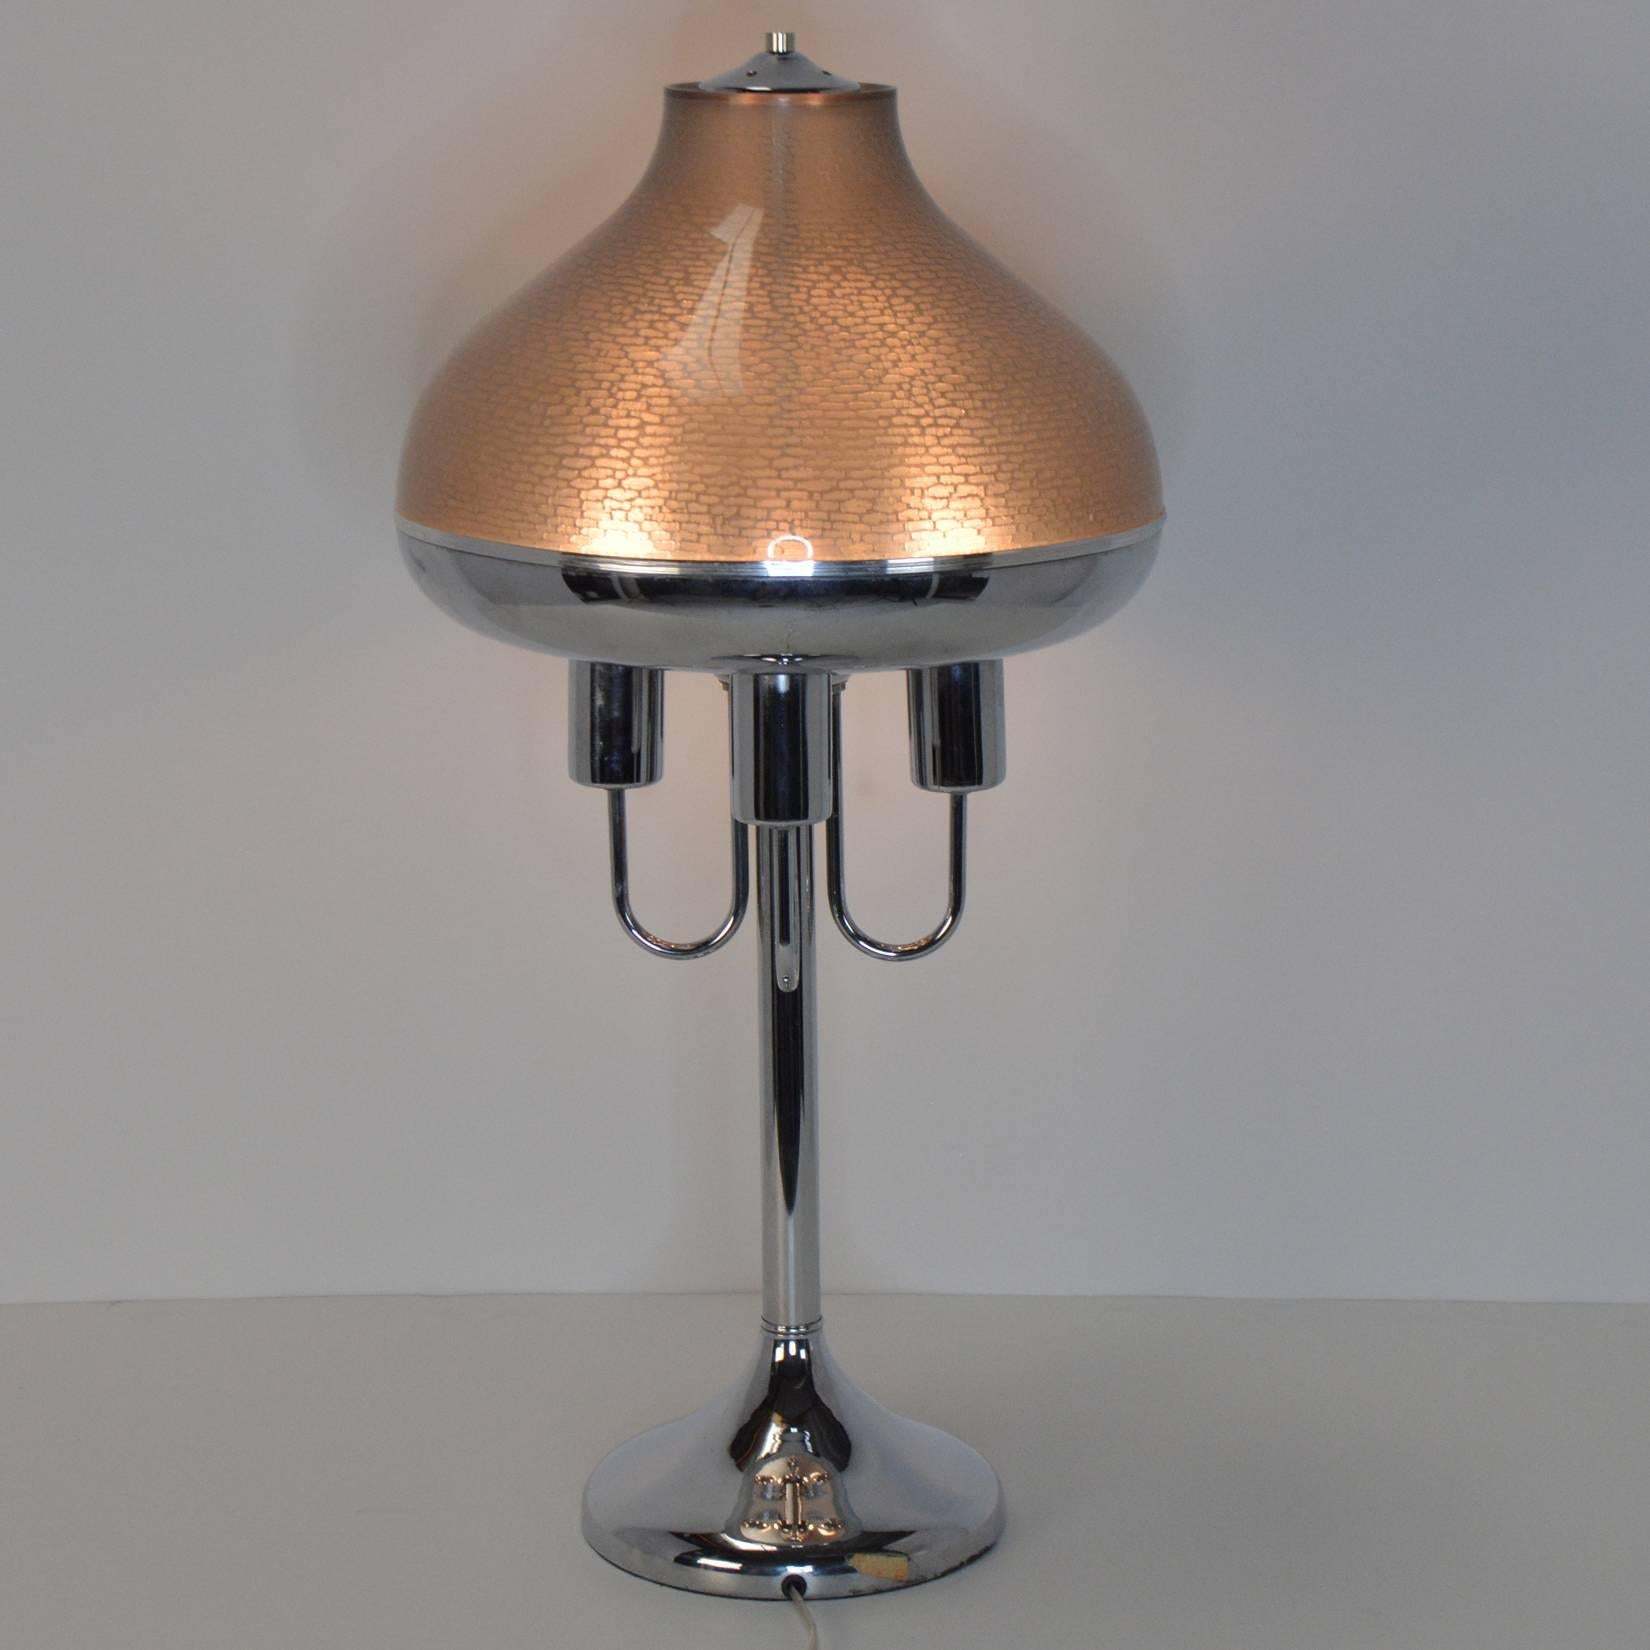 A sculptural Italian chrome lamp with four arms and sockets under a textured, smoked acrylic and chrome shade, on a central column with flared base. Large-scale for a real statement.